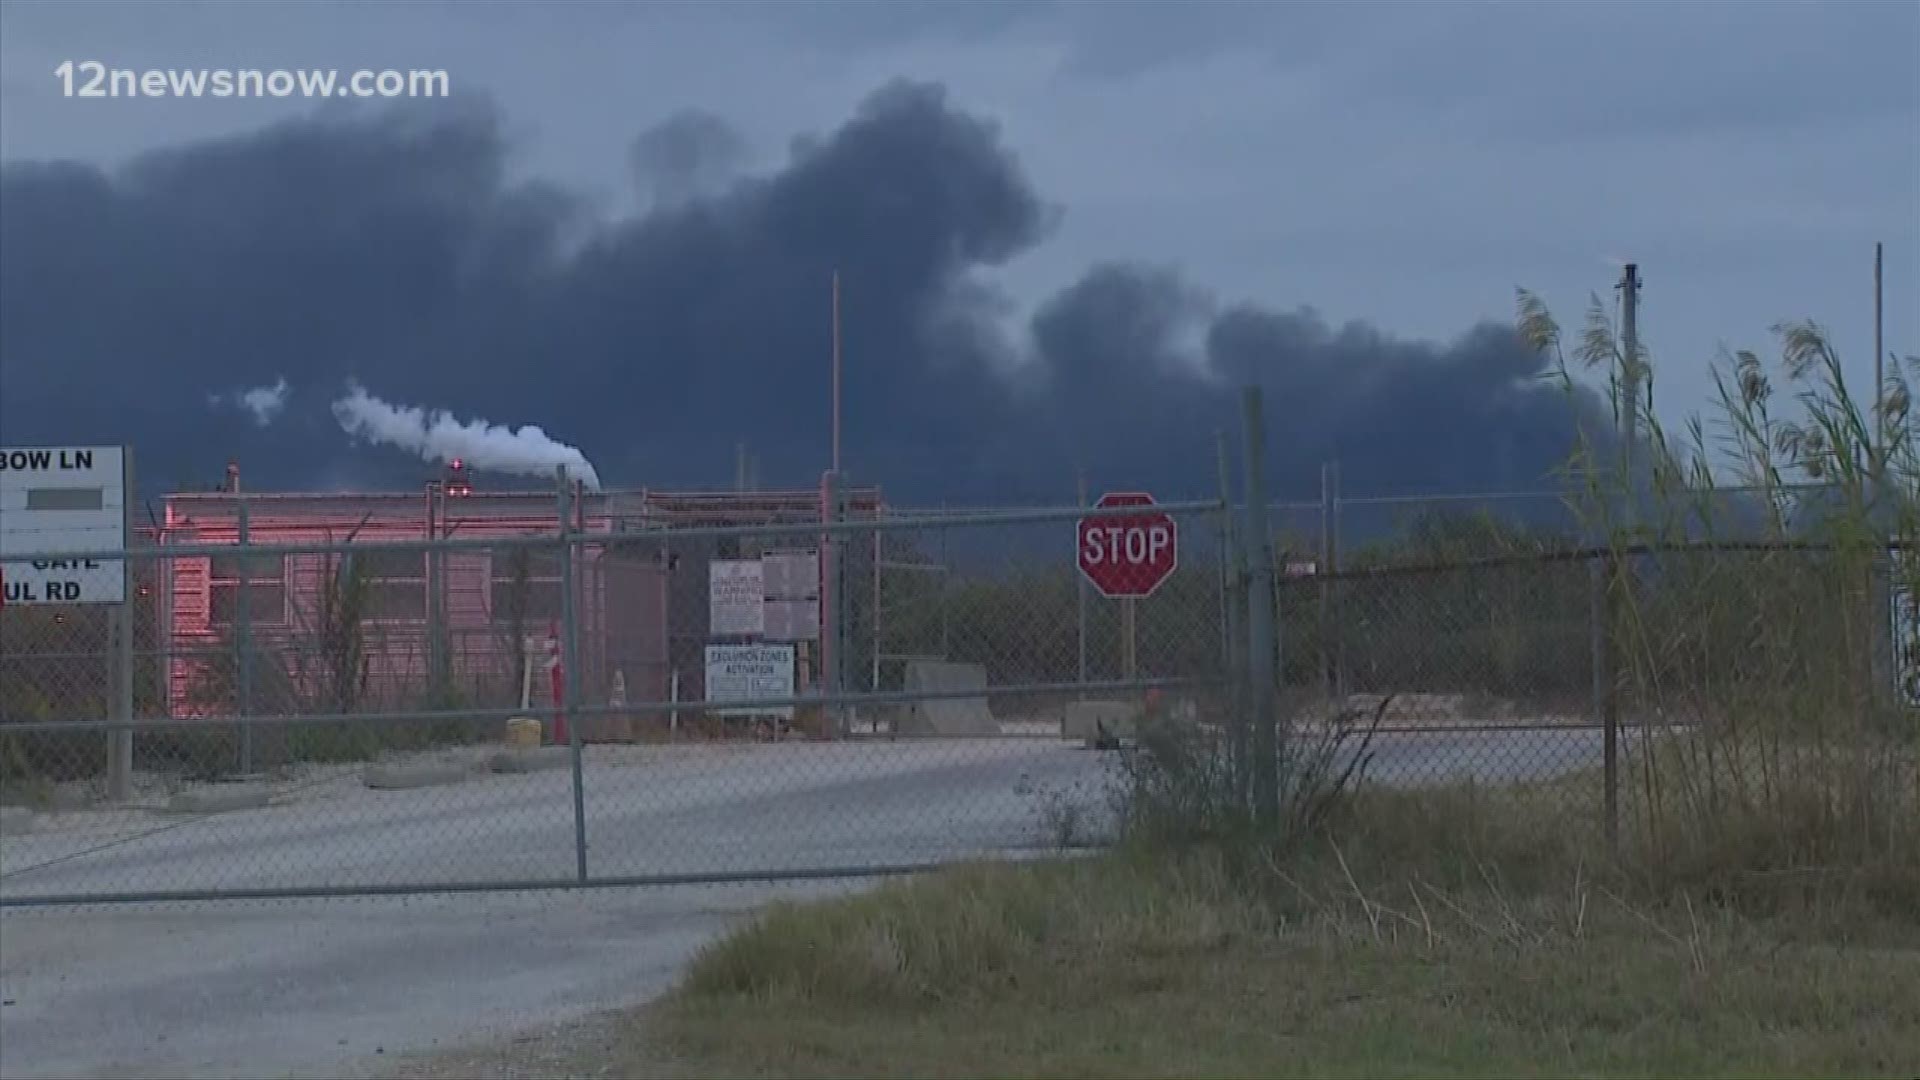 Those affected by the TPC plant explosion, listen up. Jefferson County Judge Larry Thorne says the first thing you should do is hire a lawyer.